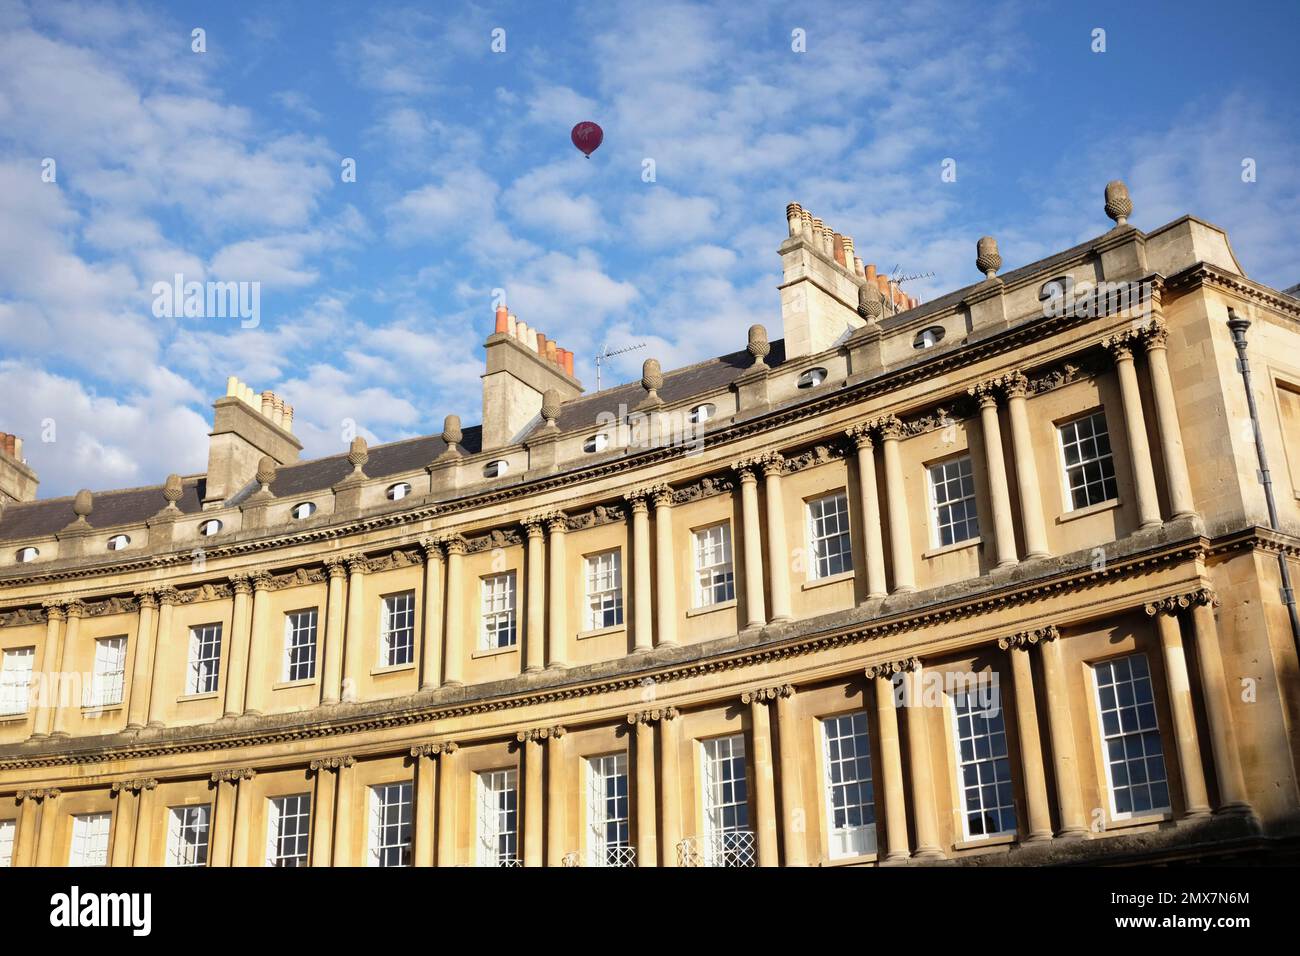 England, Bath, Exterior view of Royal Crescent with red hot air balloon in the blue sky with Cirrocumulus clouds. Stock Photo